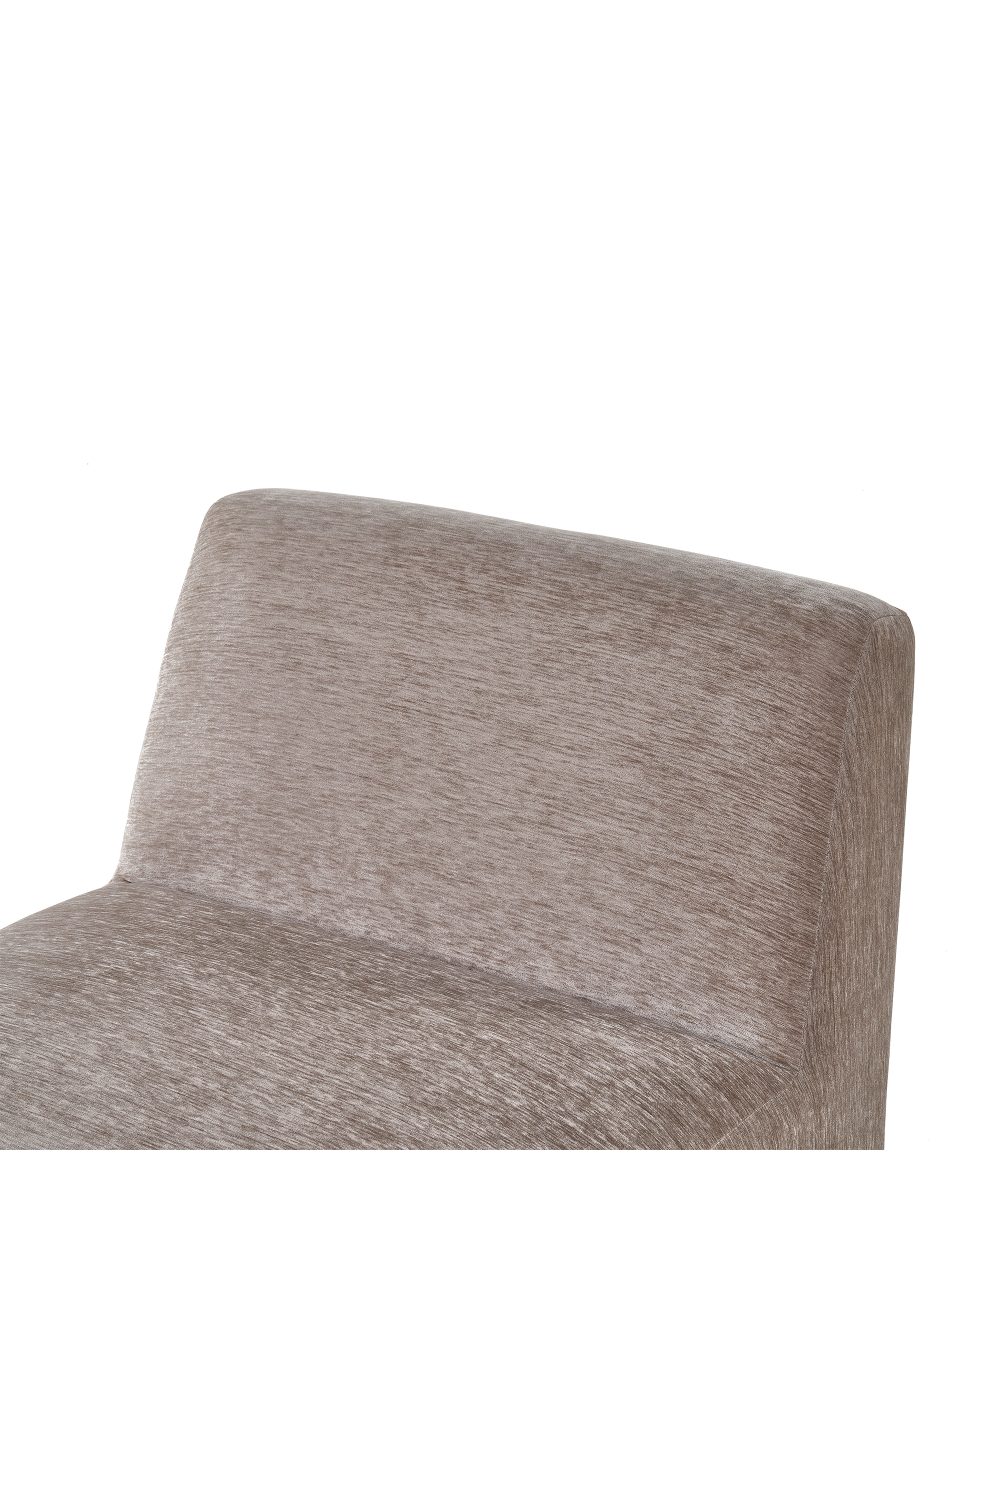 Chenille Occasional Chair | Liang & Eimil Arnot | Oroa.com